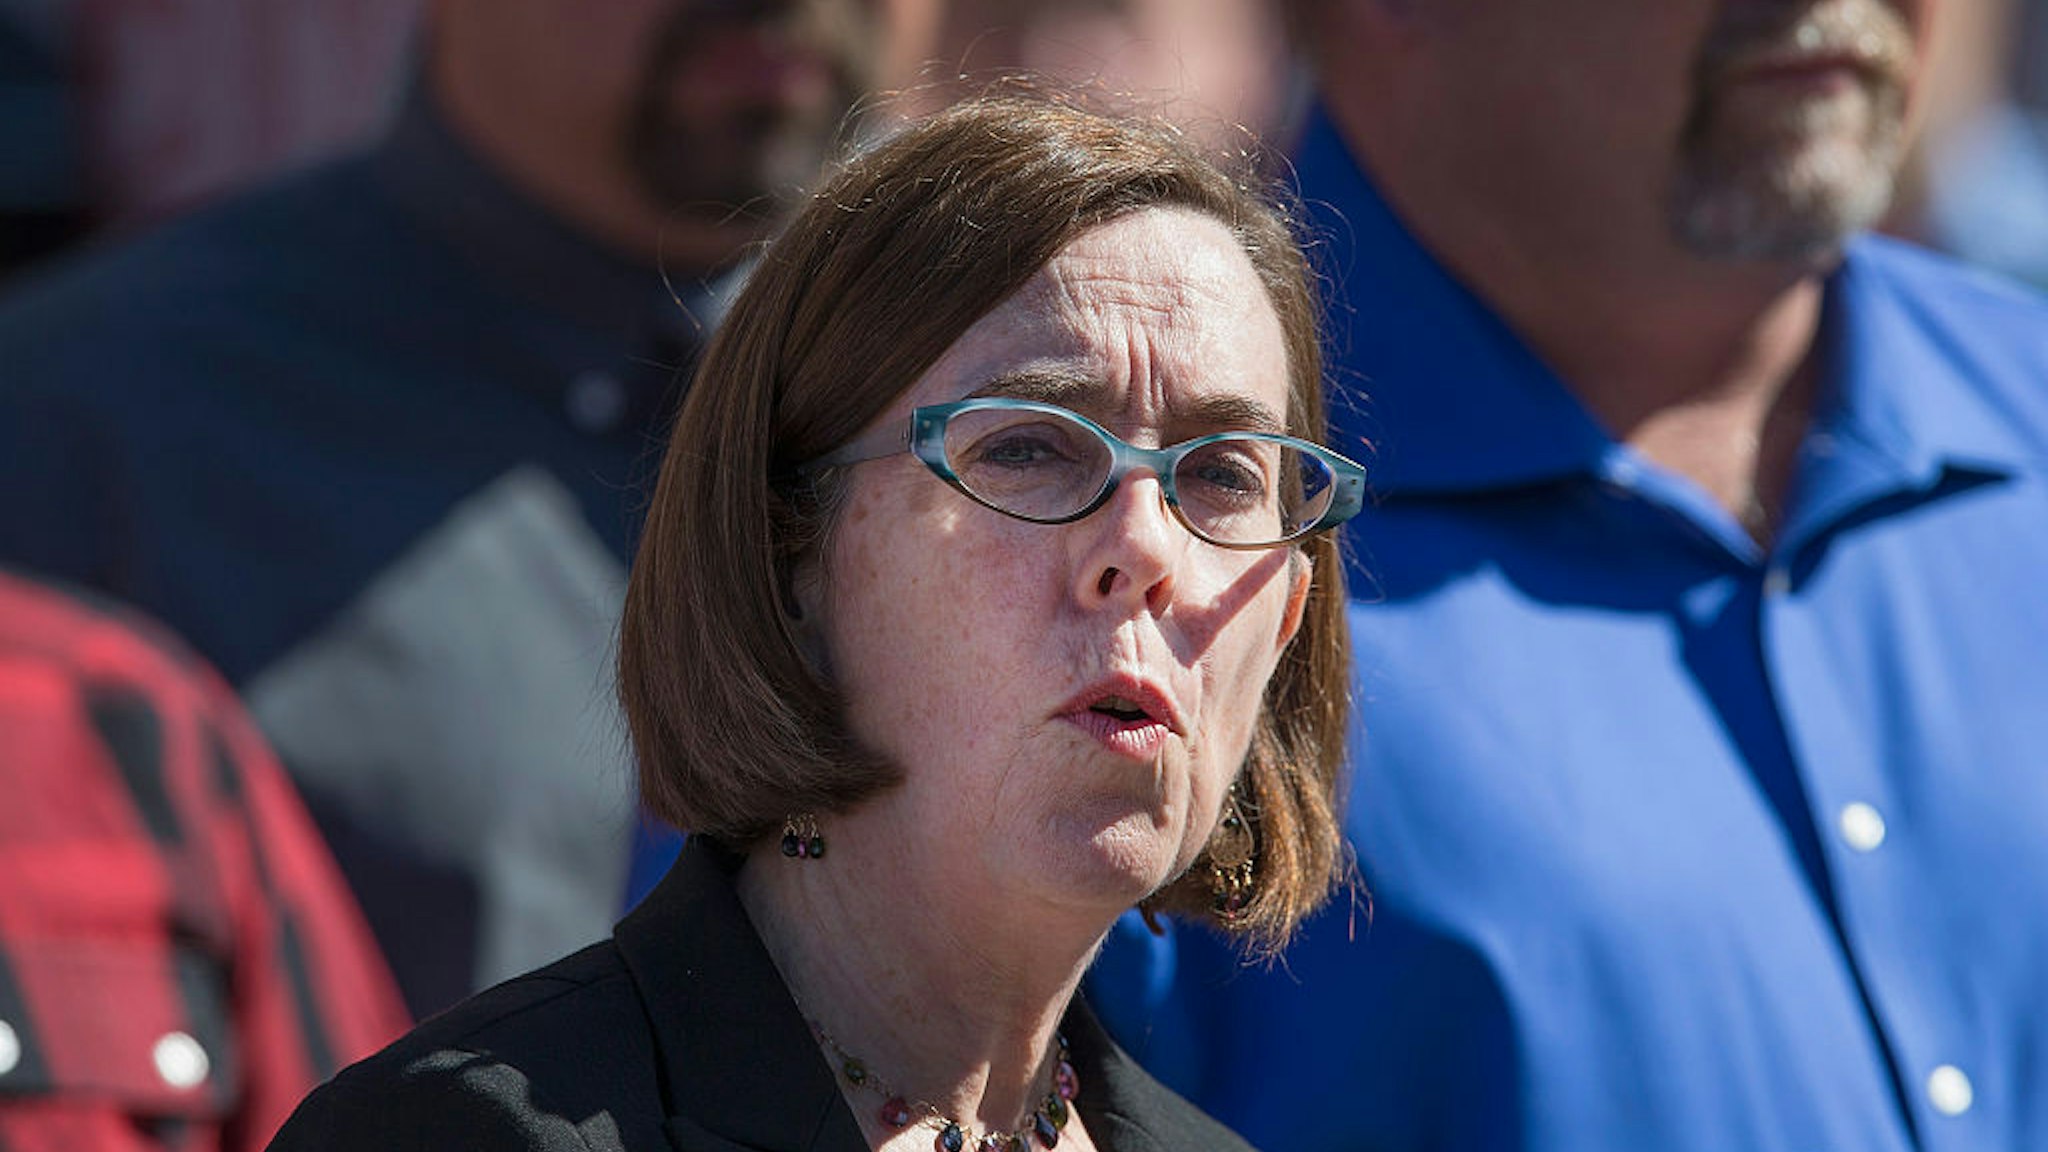 ROSEBURG, OR - OCTOBER 02: Oregon governor Kate Brown speaks to the press about the mass shooting at Umpqua Community College on October 2, 2015 in Roseburg, Oregon. Yesterday 26-year-old Chris Harper Mercer went on a shooting rampage at the campus, killing 9 people and wounding another seven before he was killed. (Photo by Scott Olson/Getty Images)